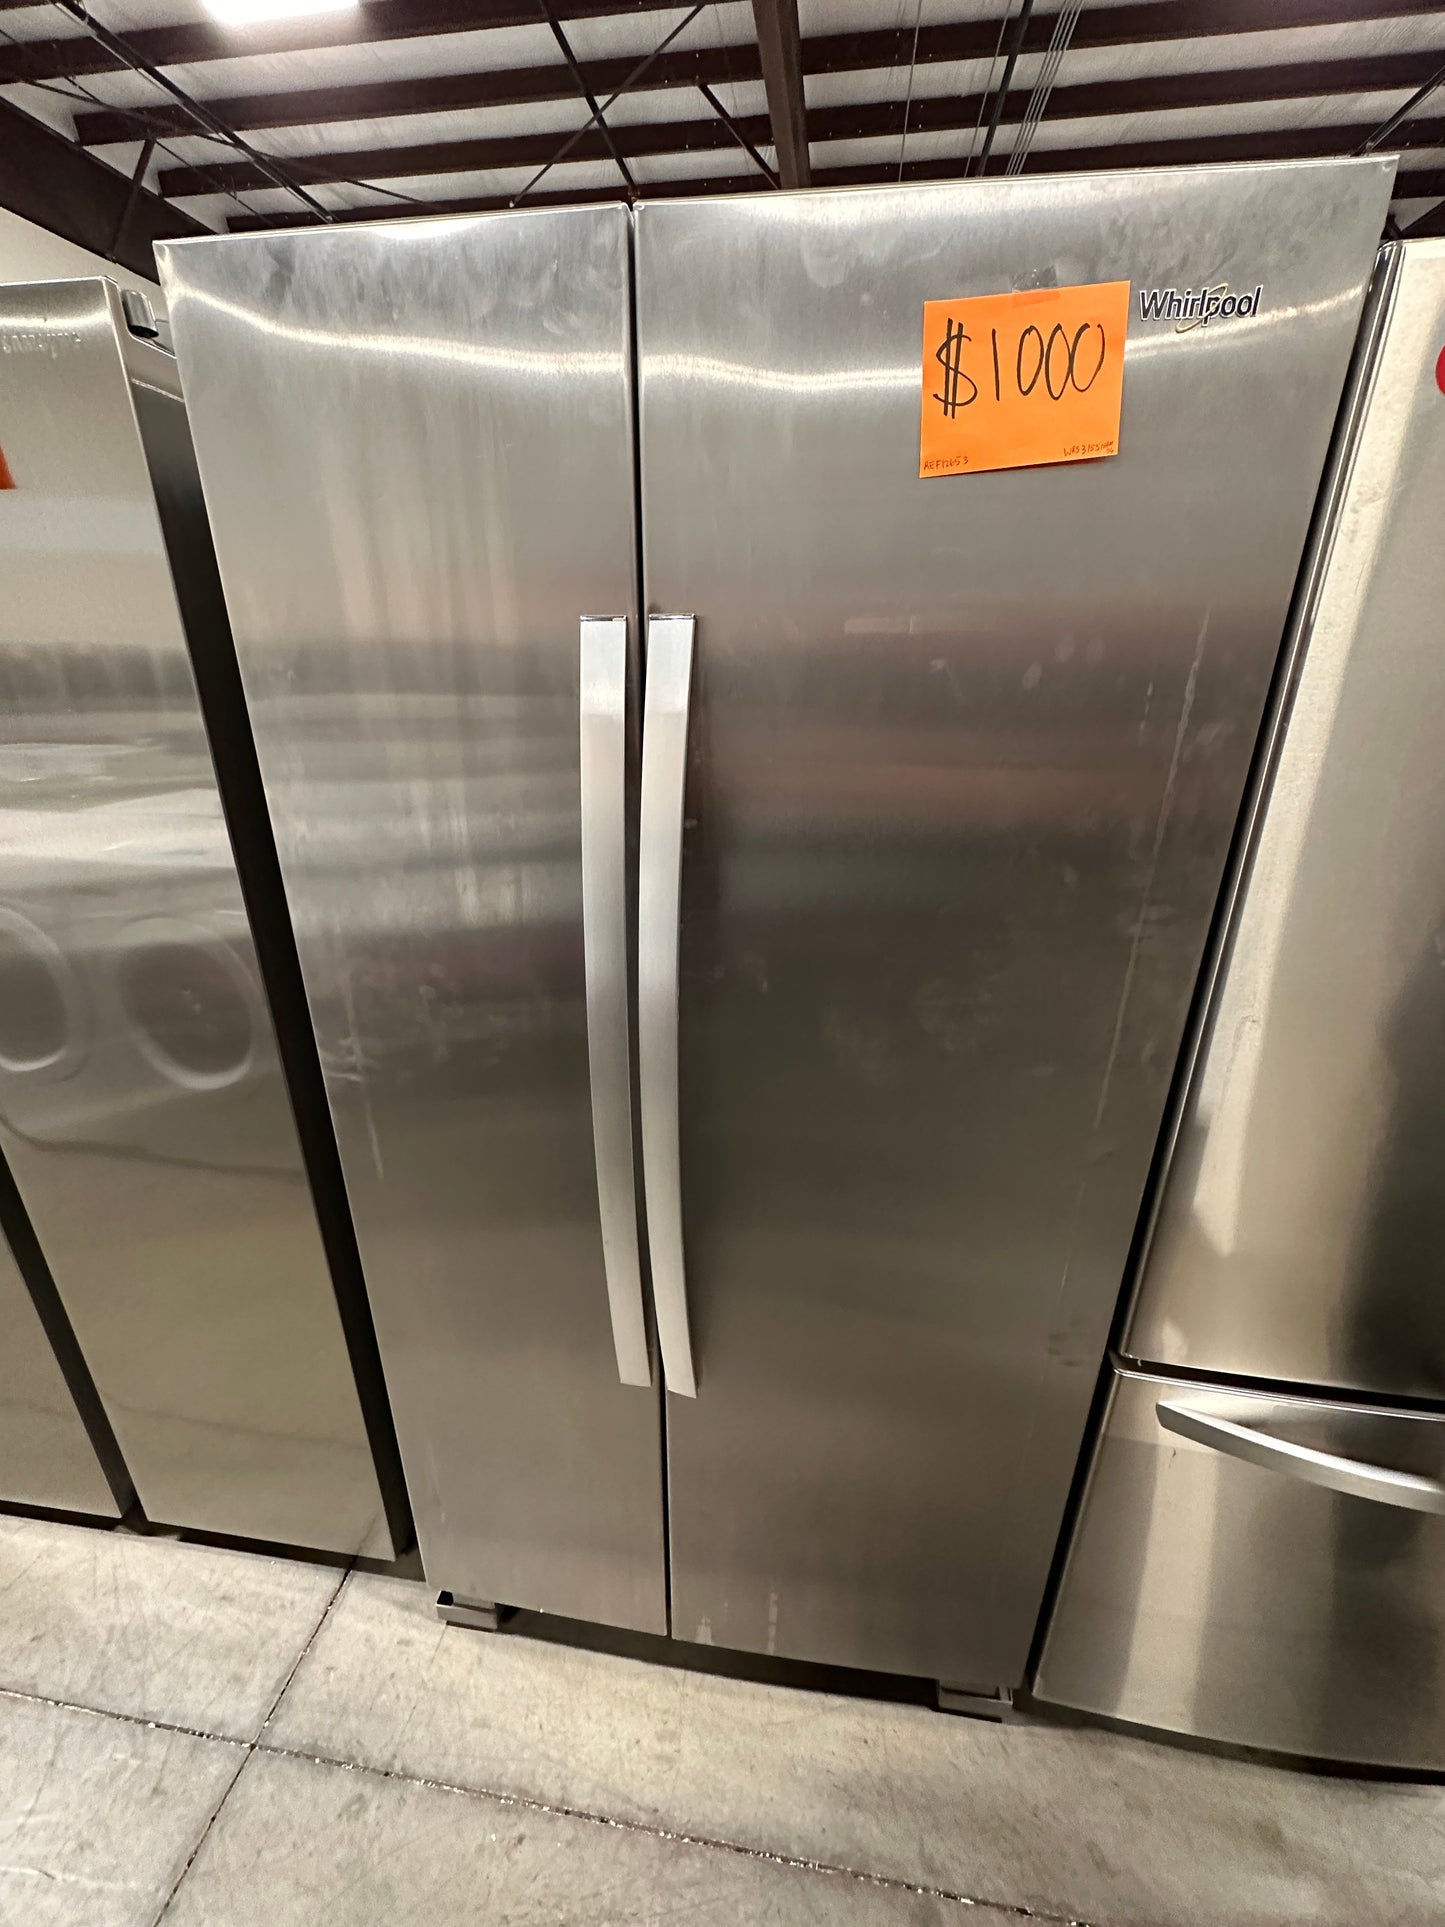 GORGEOUS NEW WHIRLPOOL SIDE BY SIDE REFRIGERATOR - REF12653